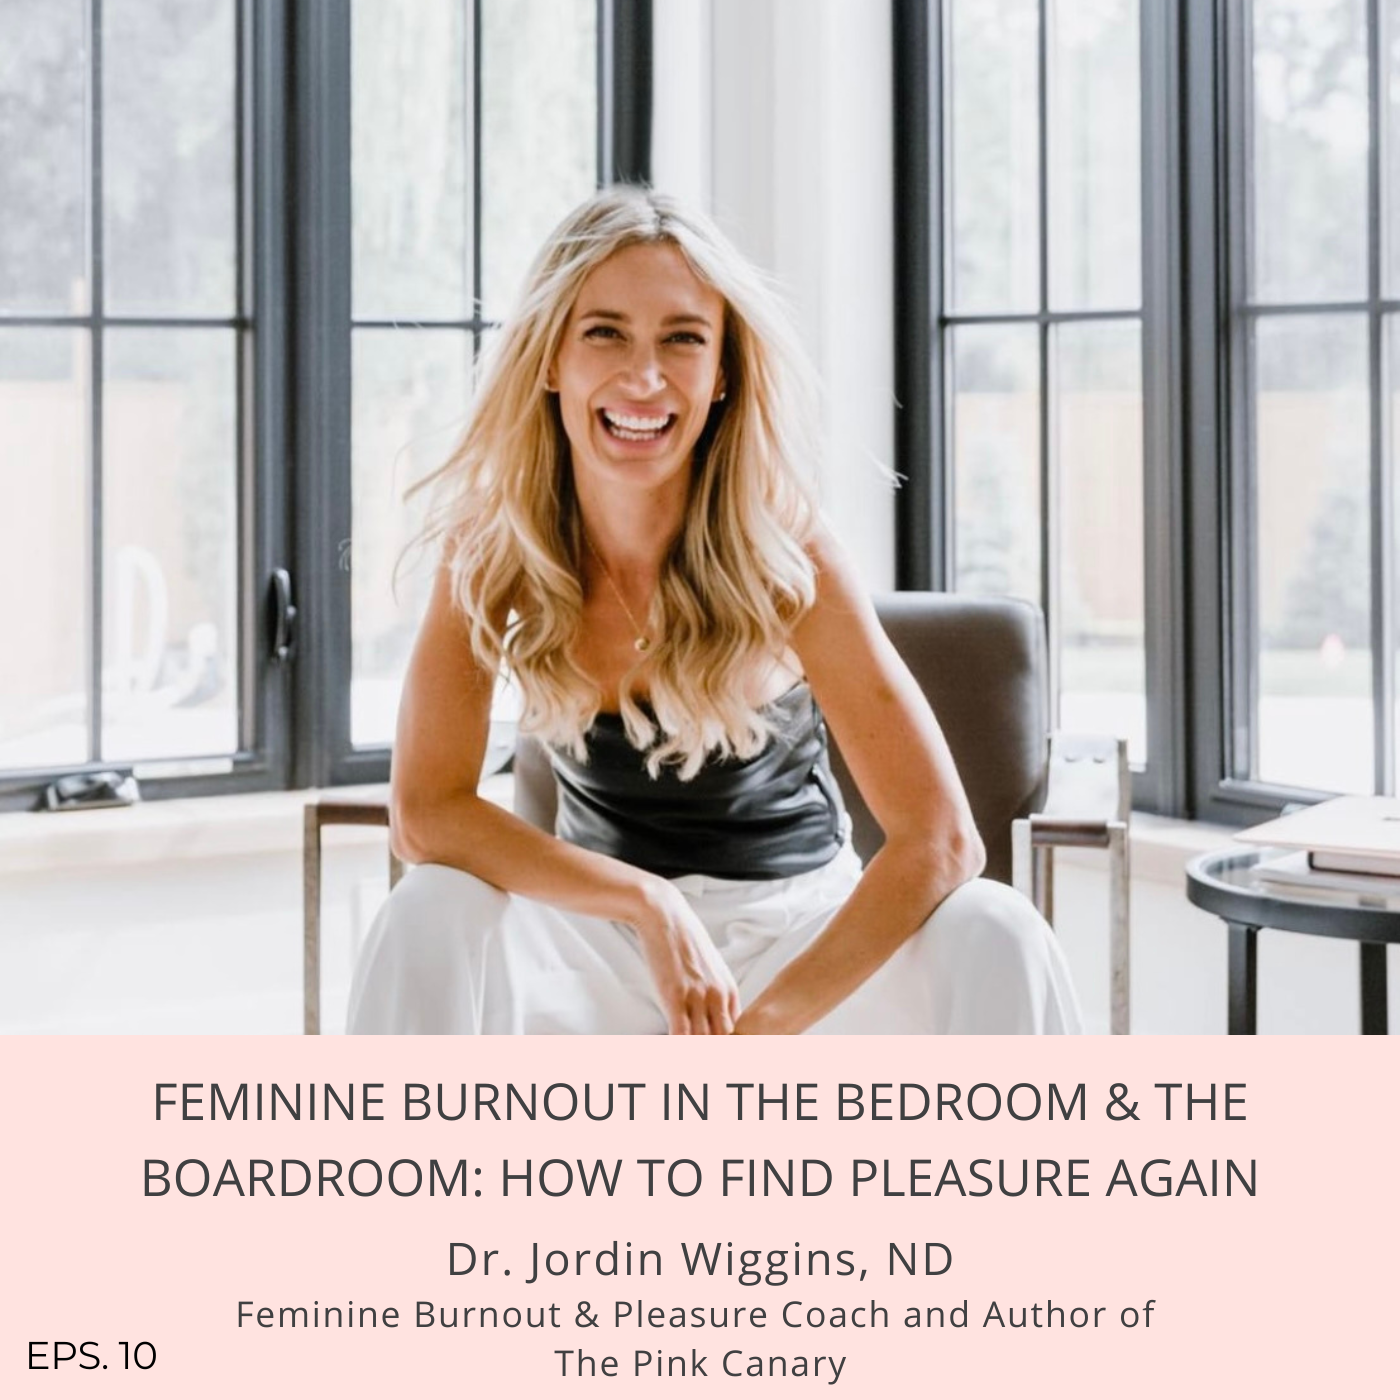 Episode 10: Feminine Burnout: How to find pleasure and intimacy again with Dr. Jordin Wiggins, ND